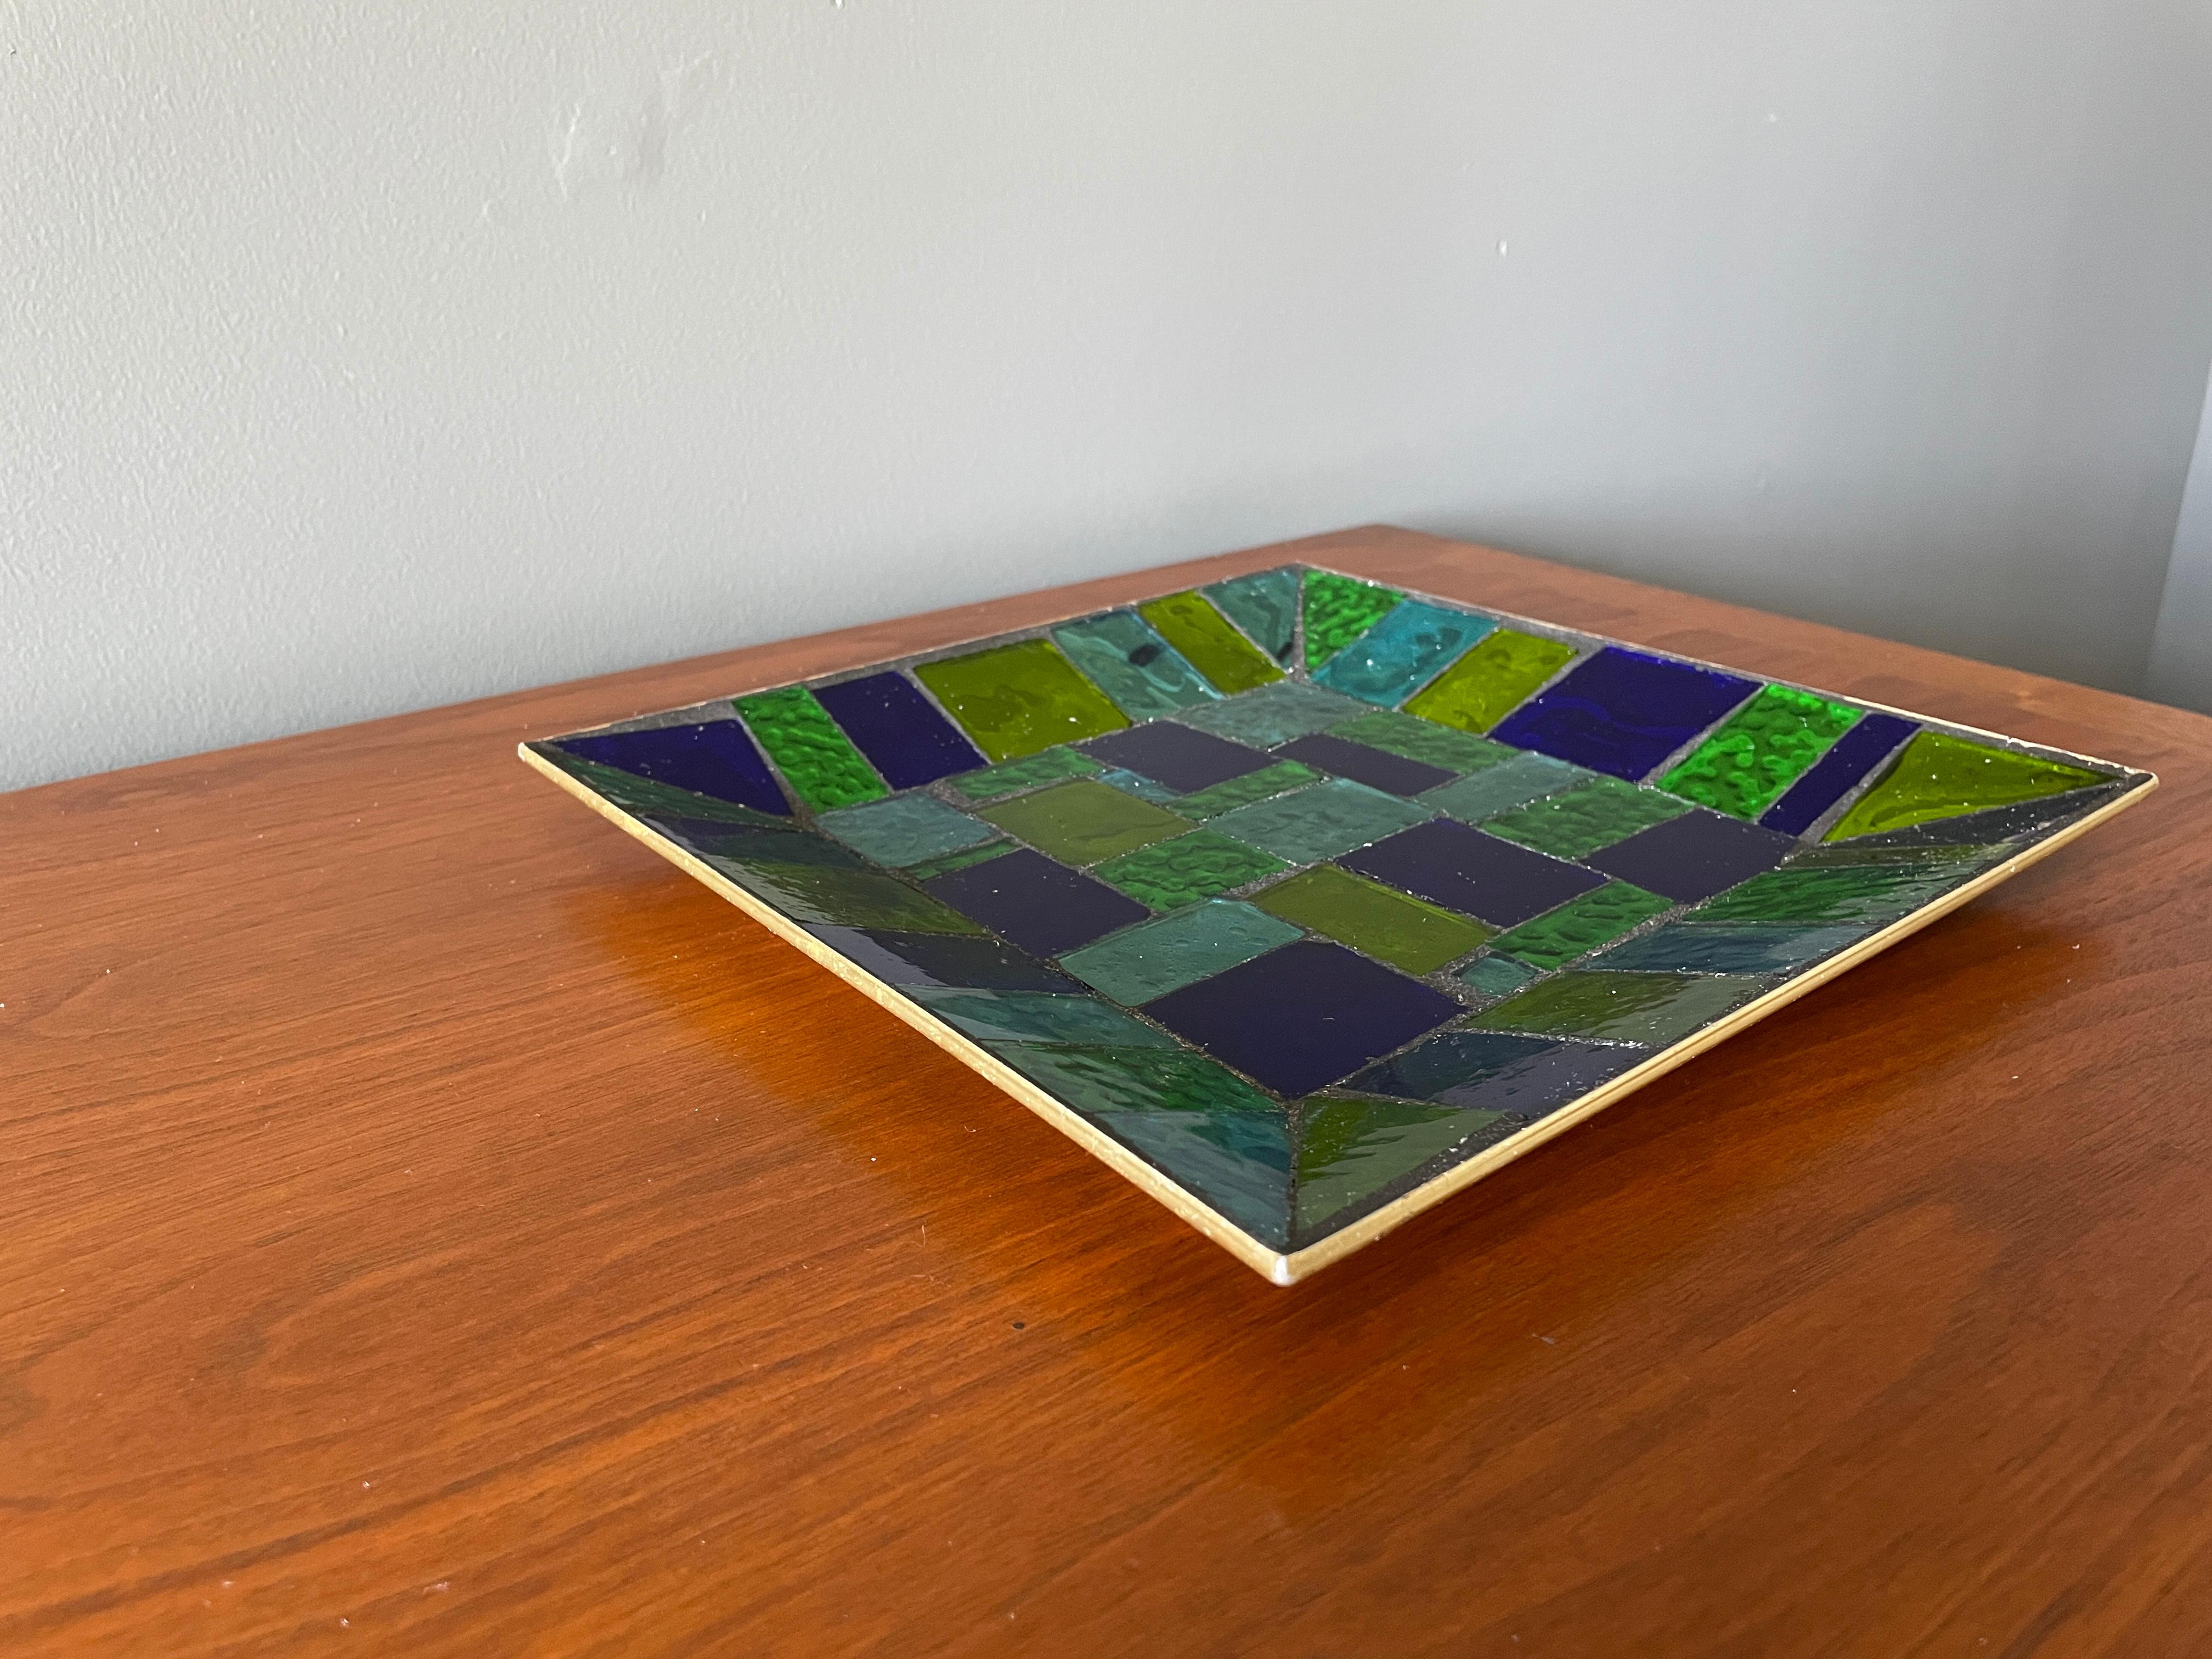 Mid-Century Modern mosaic tile tray by Georges Briard. Beautiful blue and green hues.